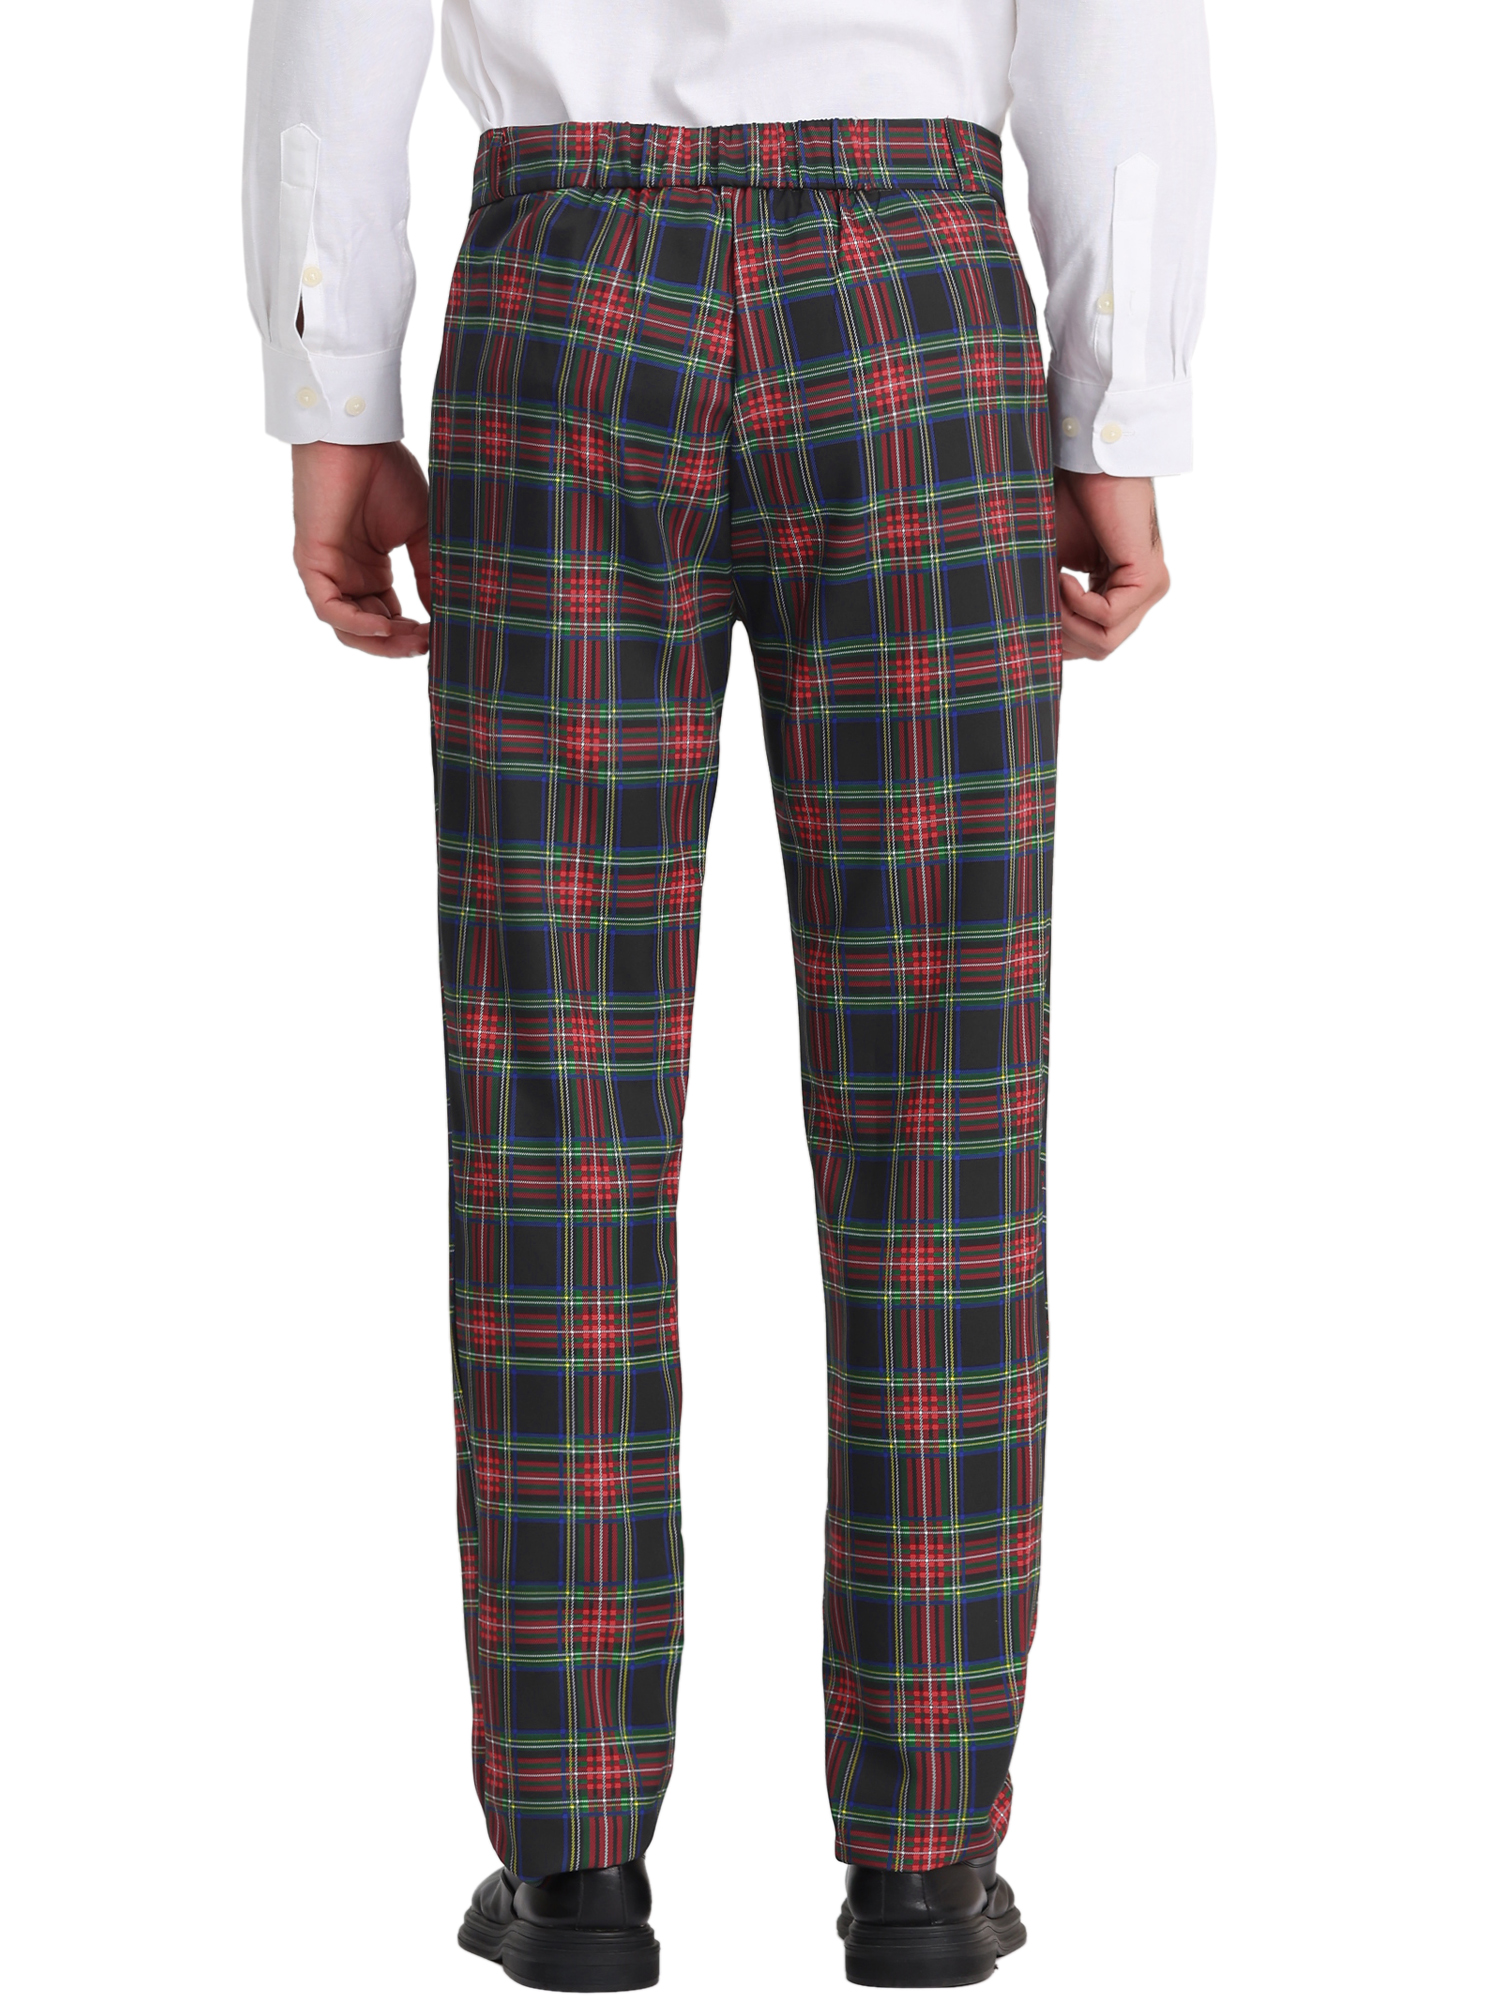 Mens Tweed Check Golf Sta Press Trousers Slim Fit 60s 70s Mod Retro Pants  (Prince of Wales Check, 30